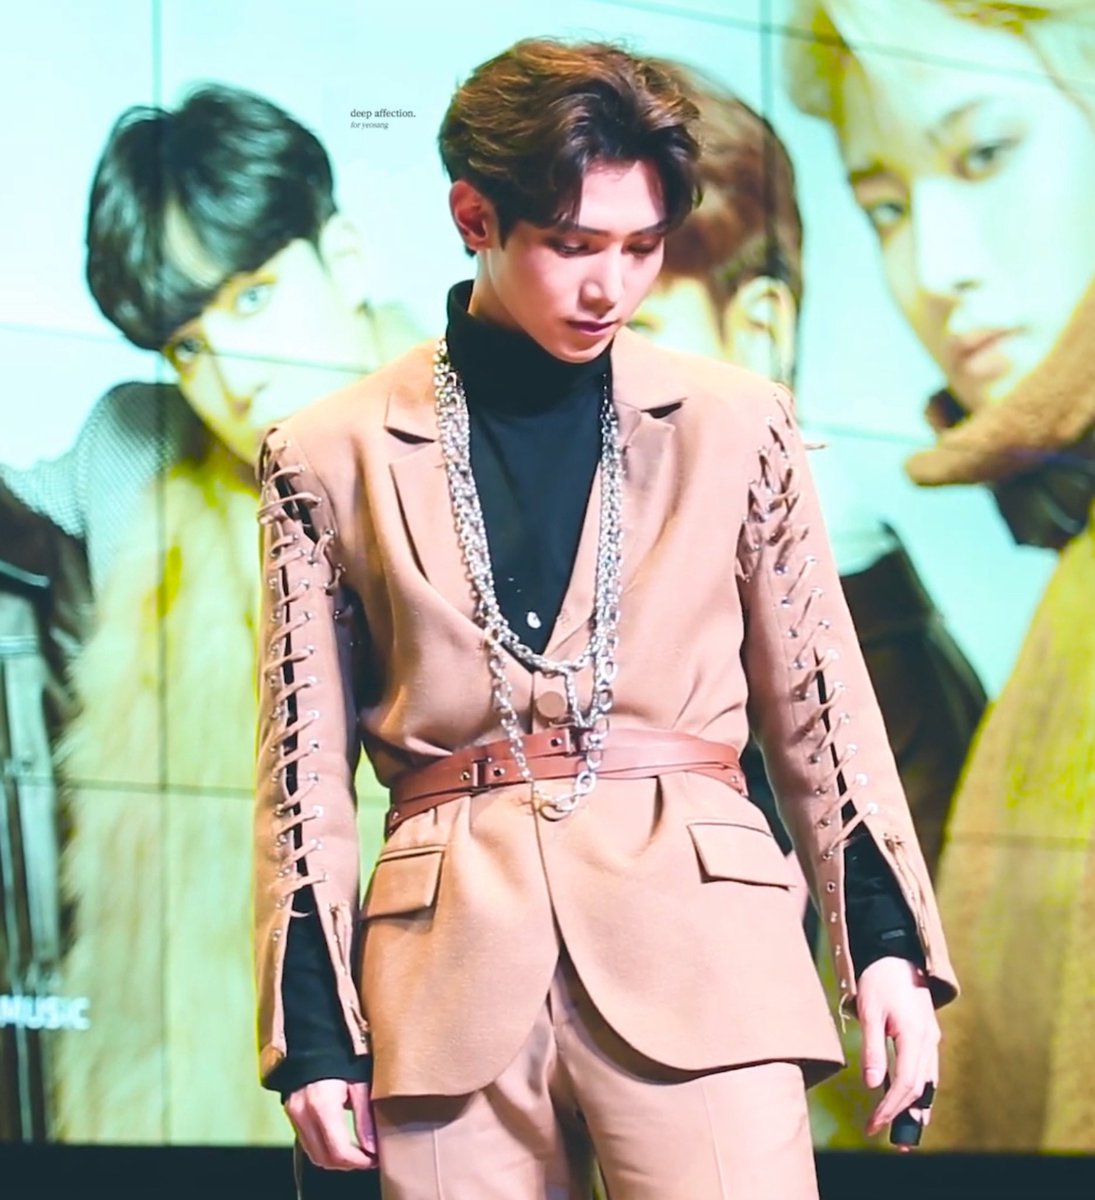 Yeosang as Tia Dalma:-fight at your own risk-holds grudges-smarter than all of you-“if you would’ve listened to me in the first place, none of this would’ve happened”-too powerful-a god trapped in human form